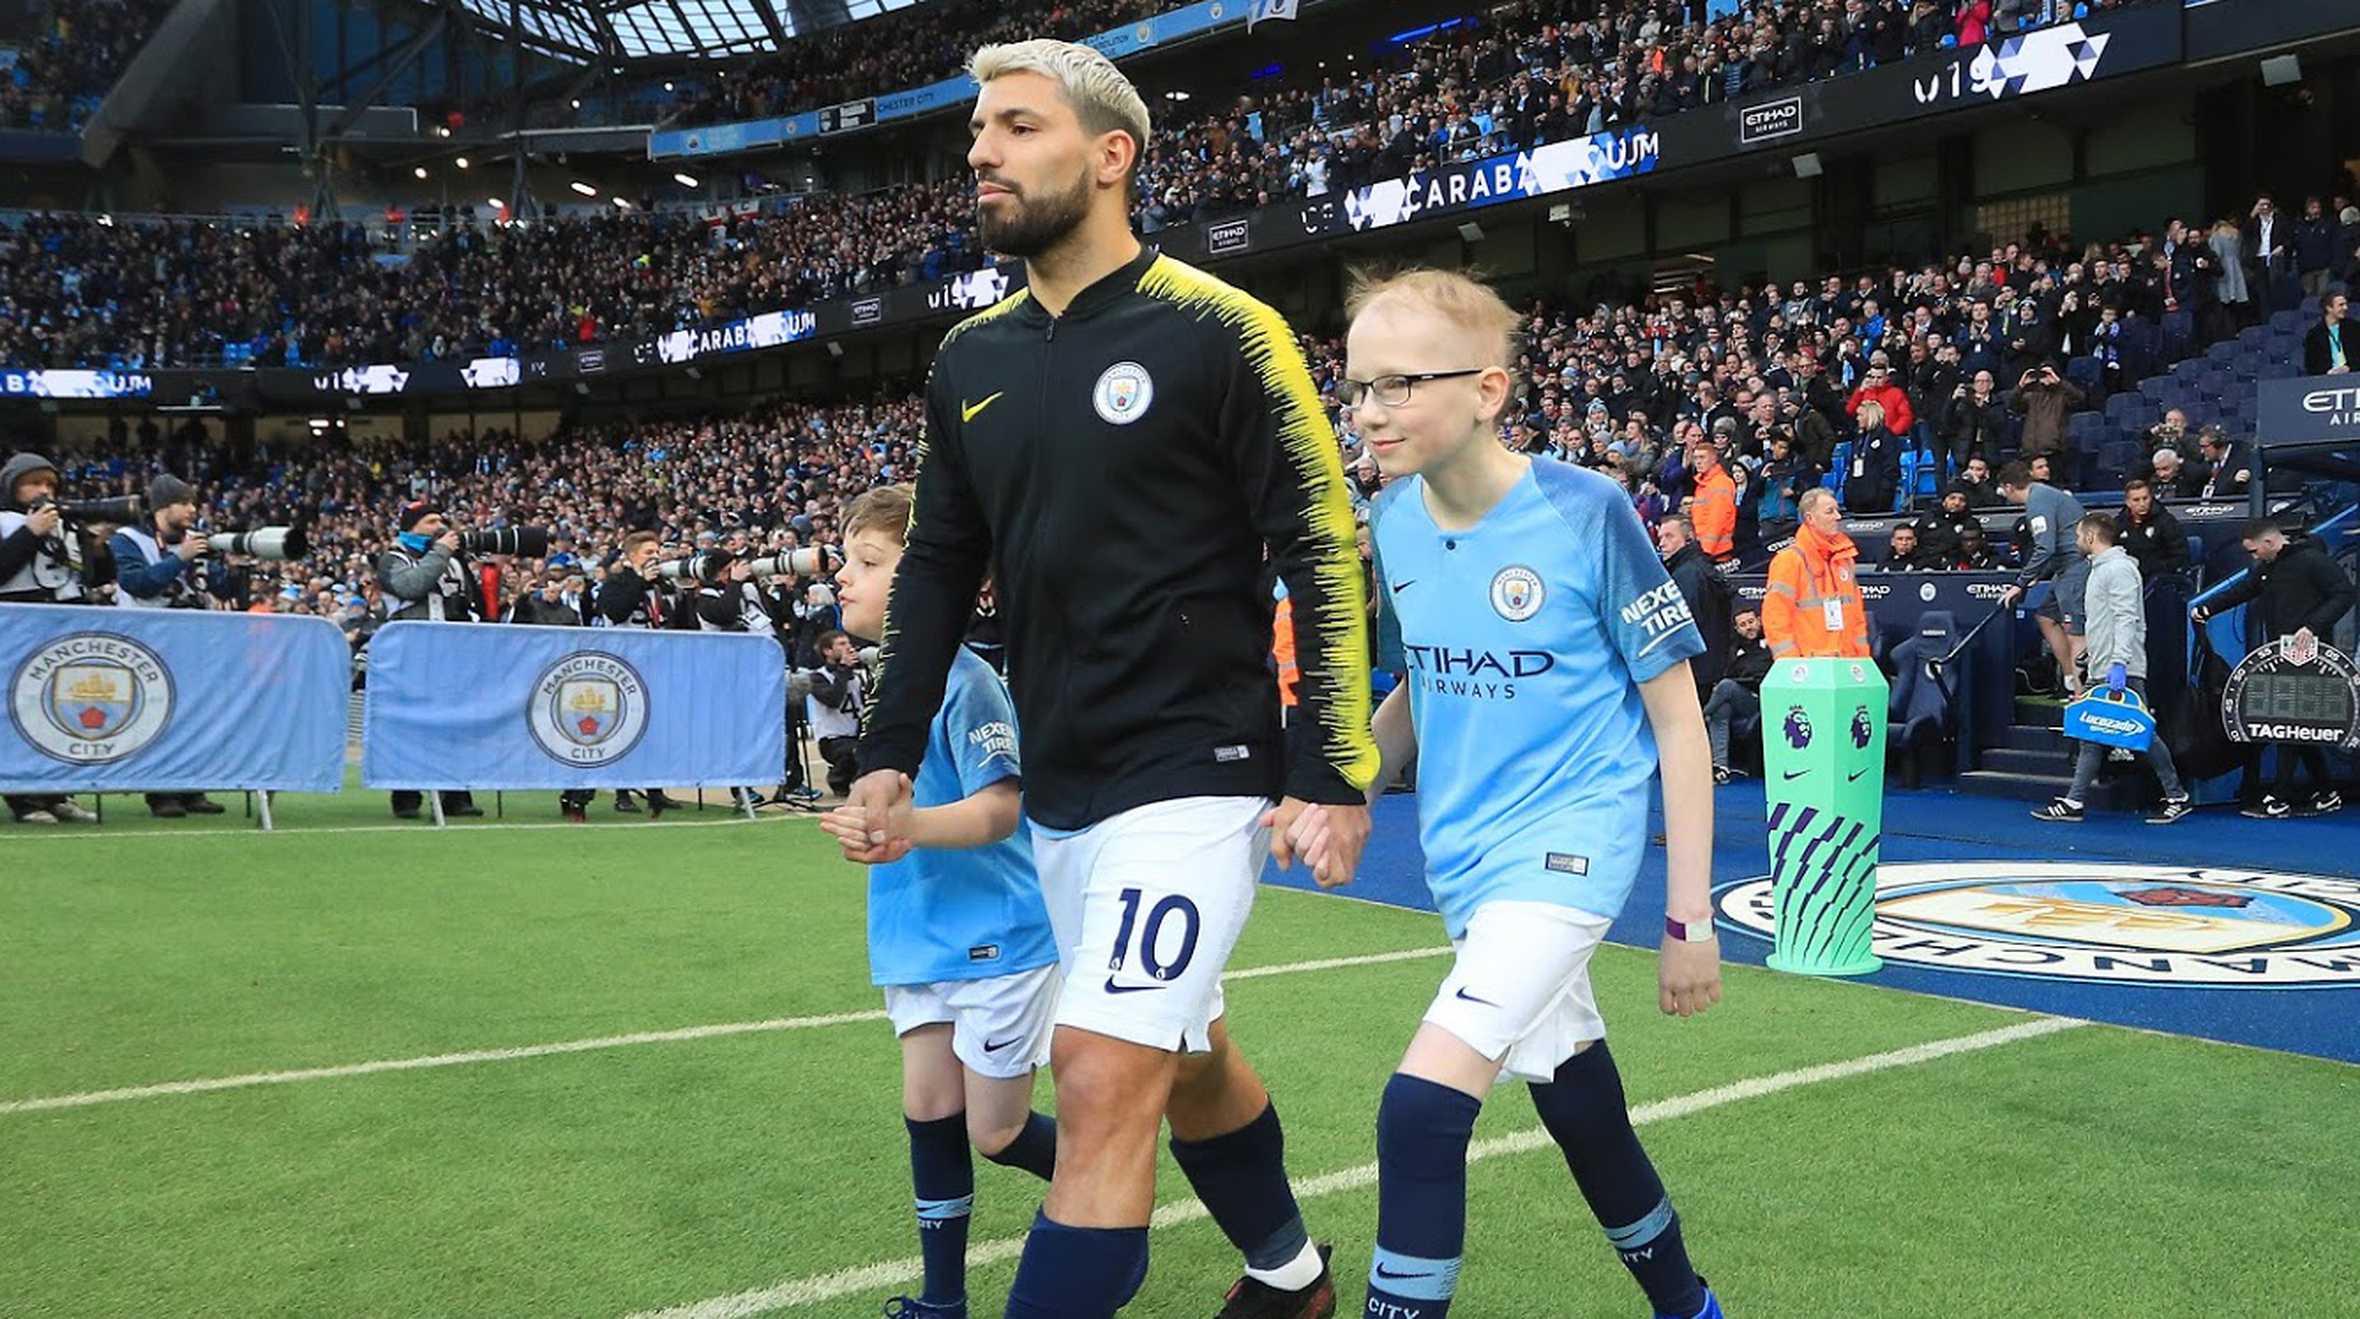 Ryan walking out with Aguero